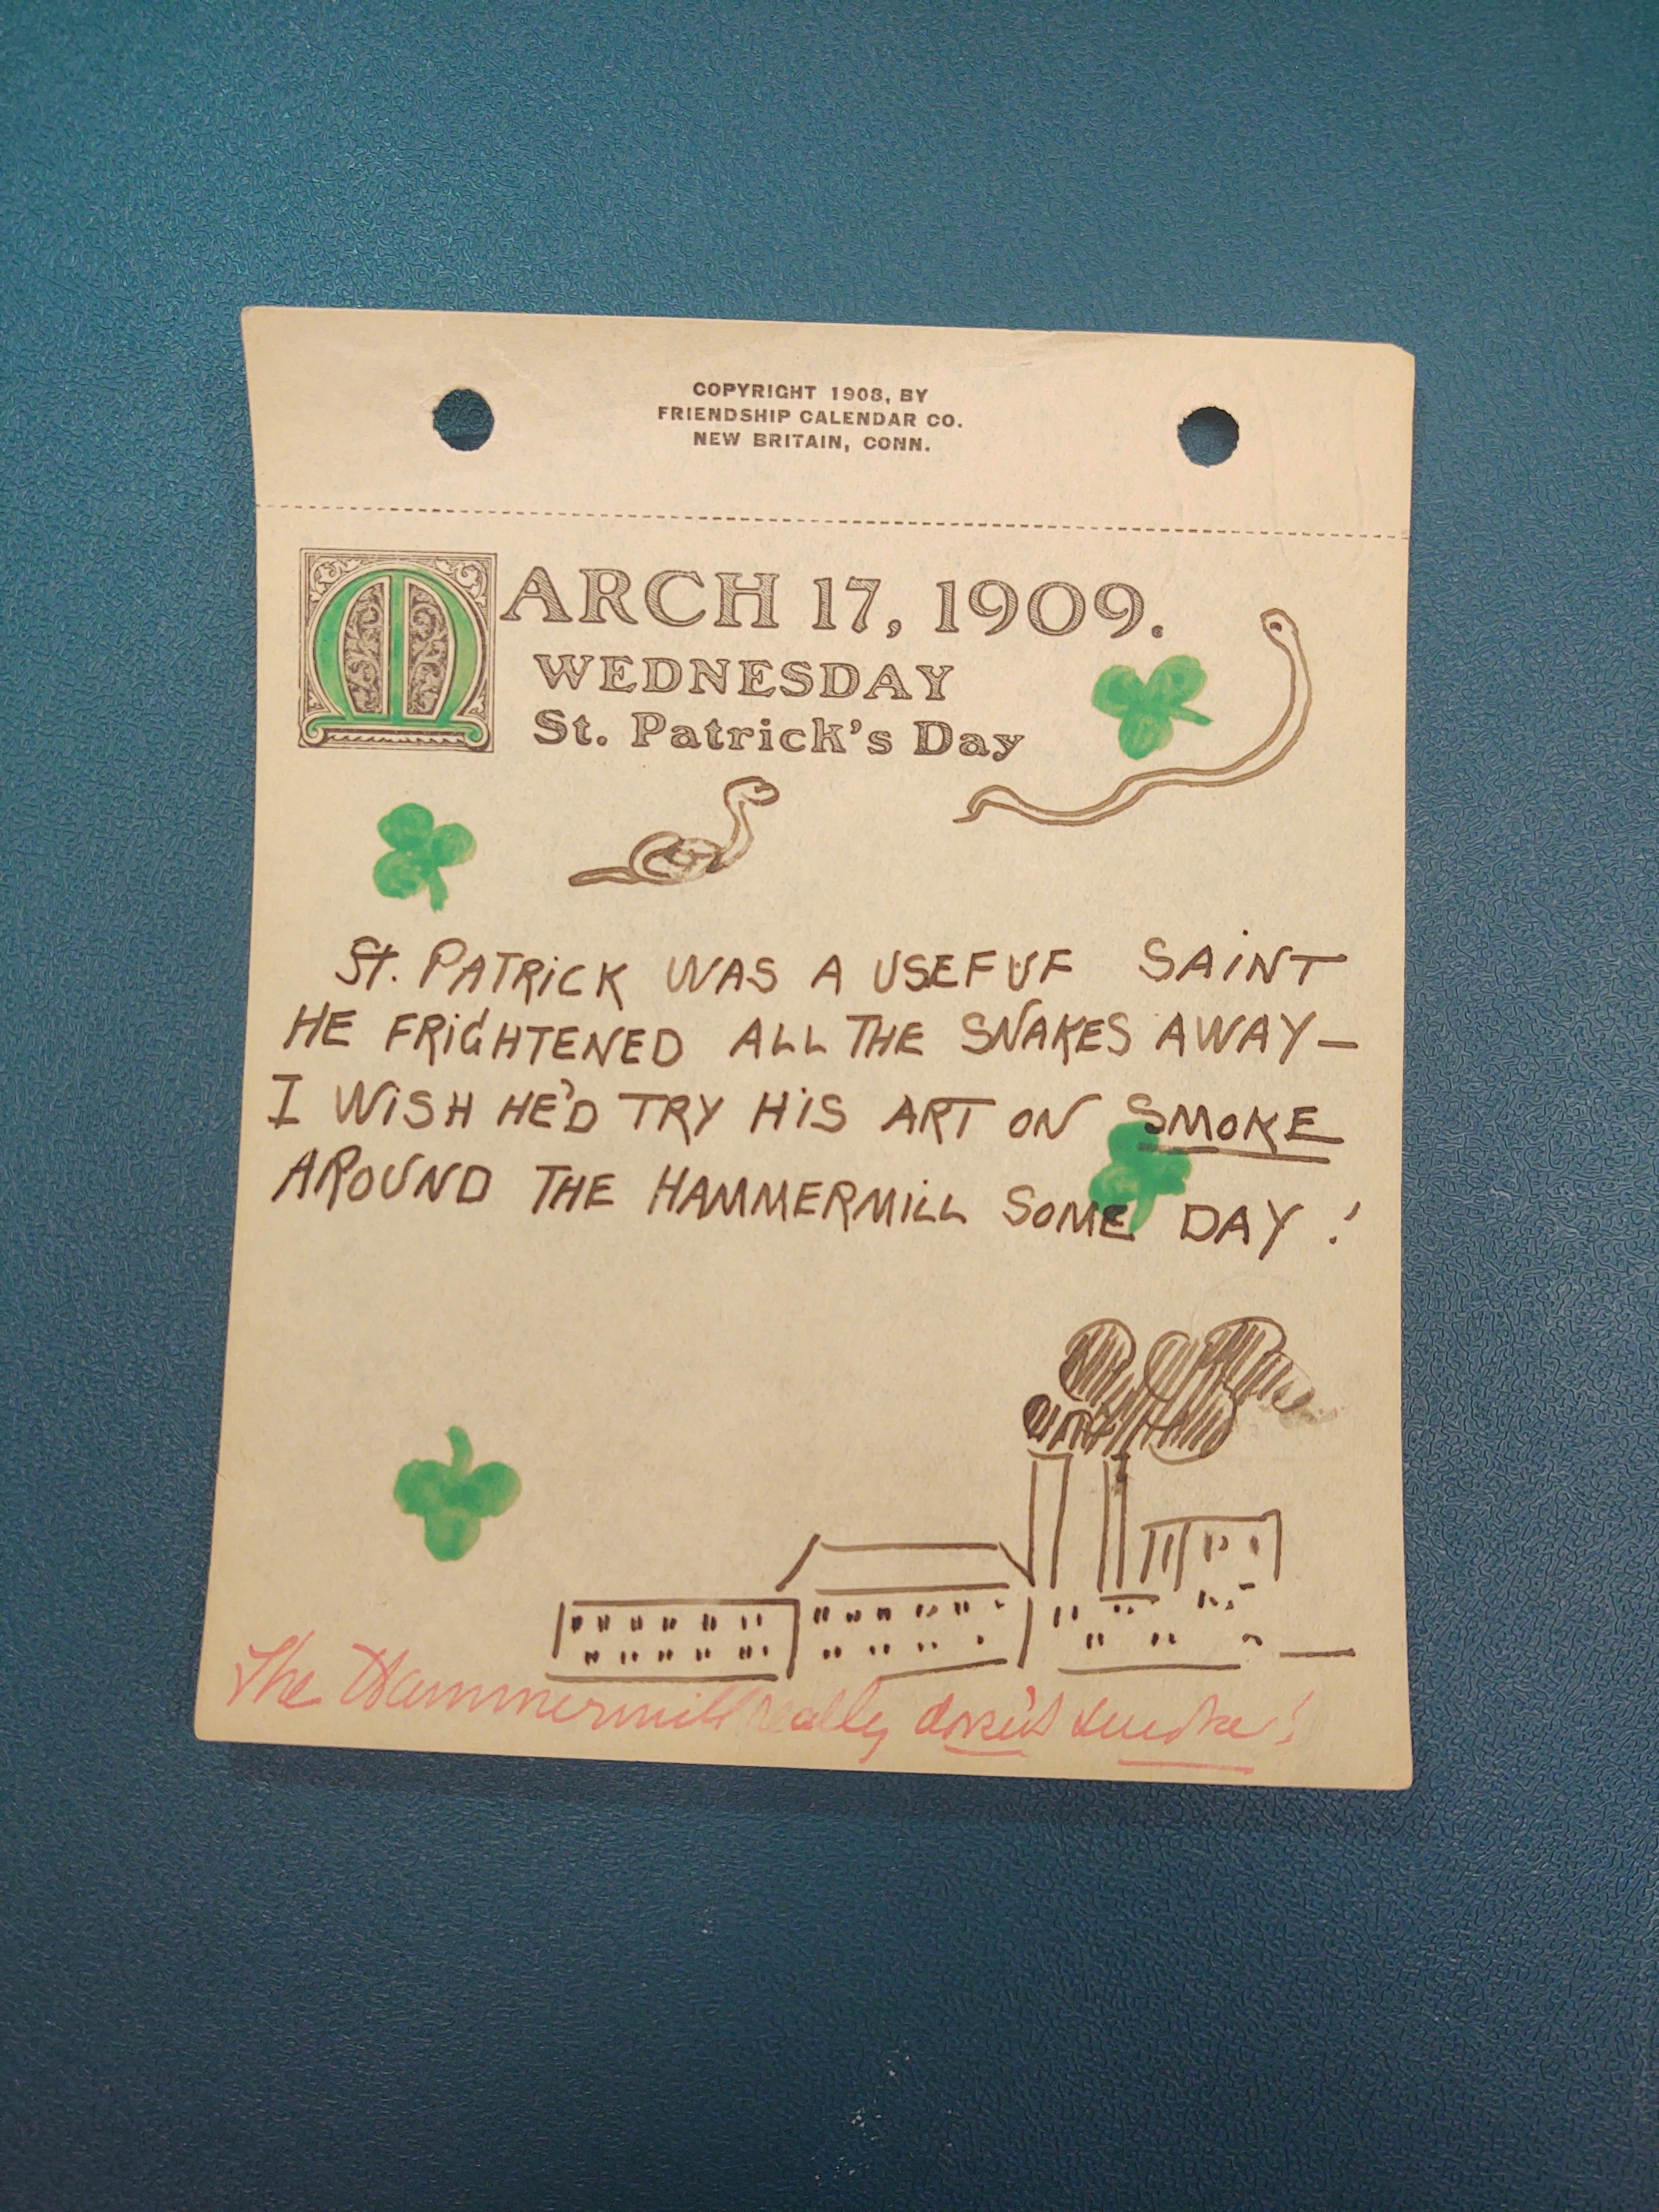 March 17, 1909. Wednesday: Green Shamrocks dispersed throughout the paper. Two snakes drawn on the top of the paper. A drawing of the Hammermill center at the bottom right corner.